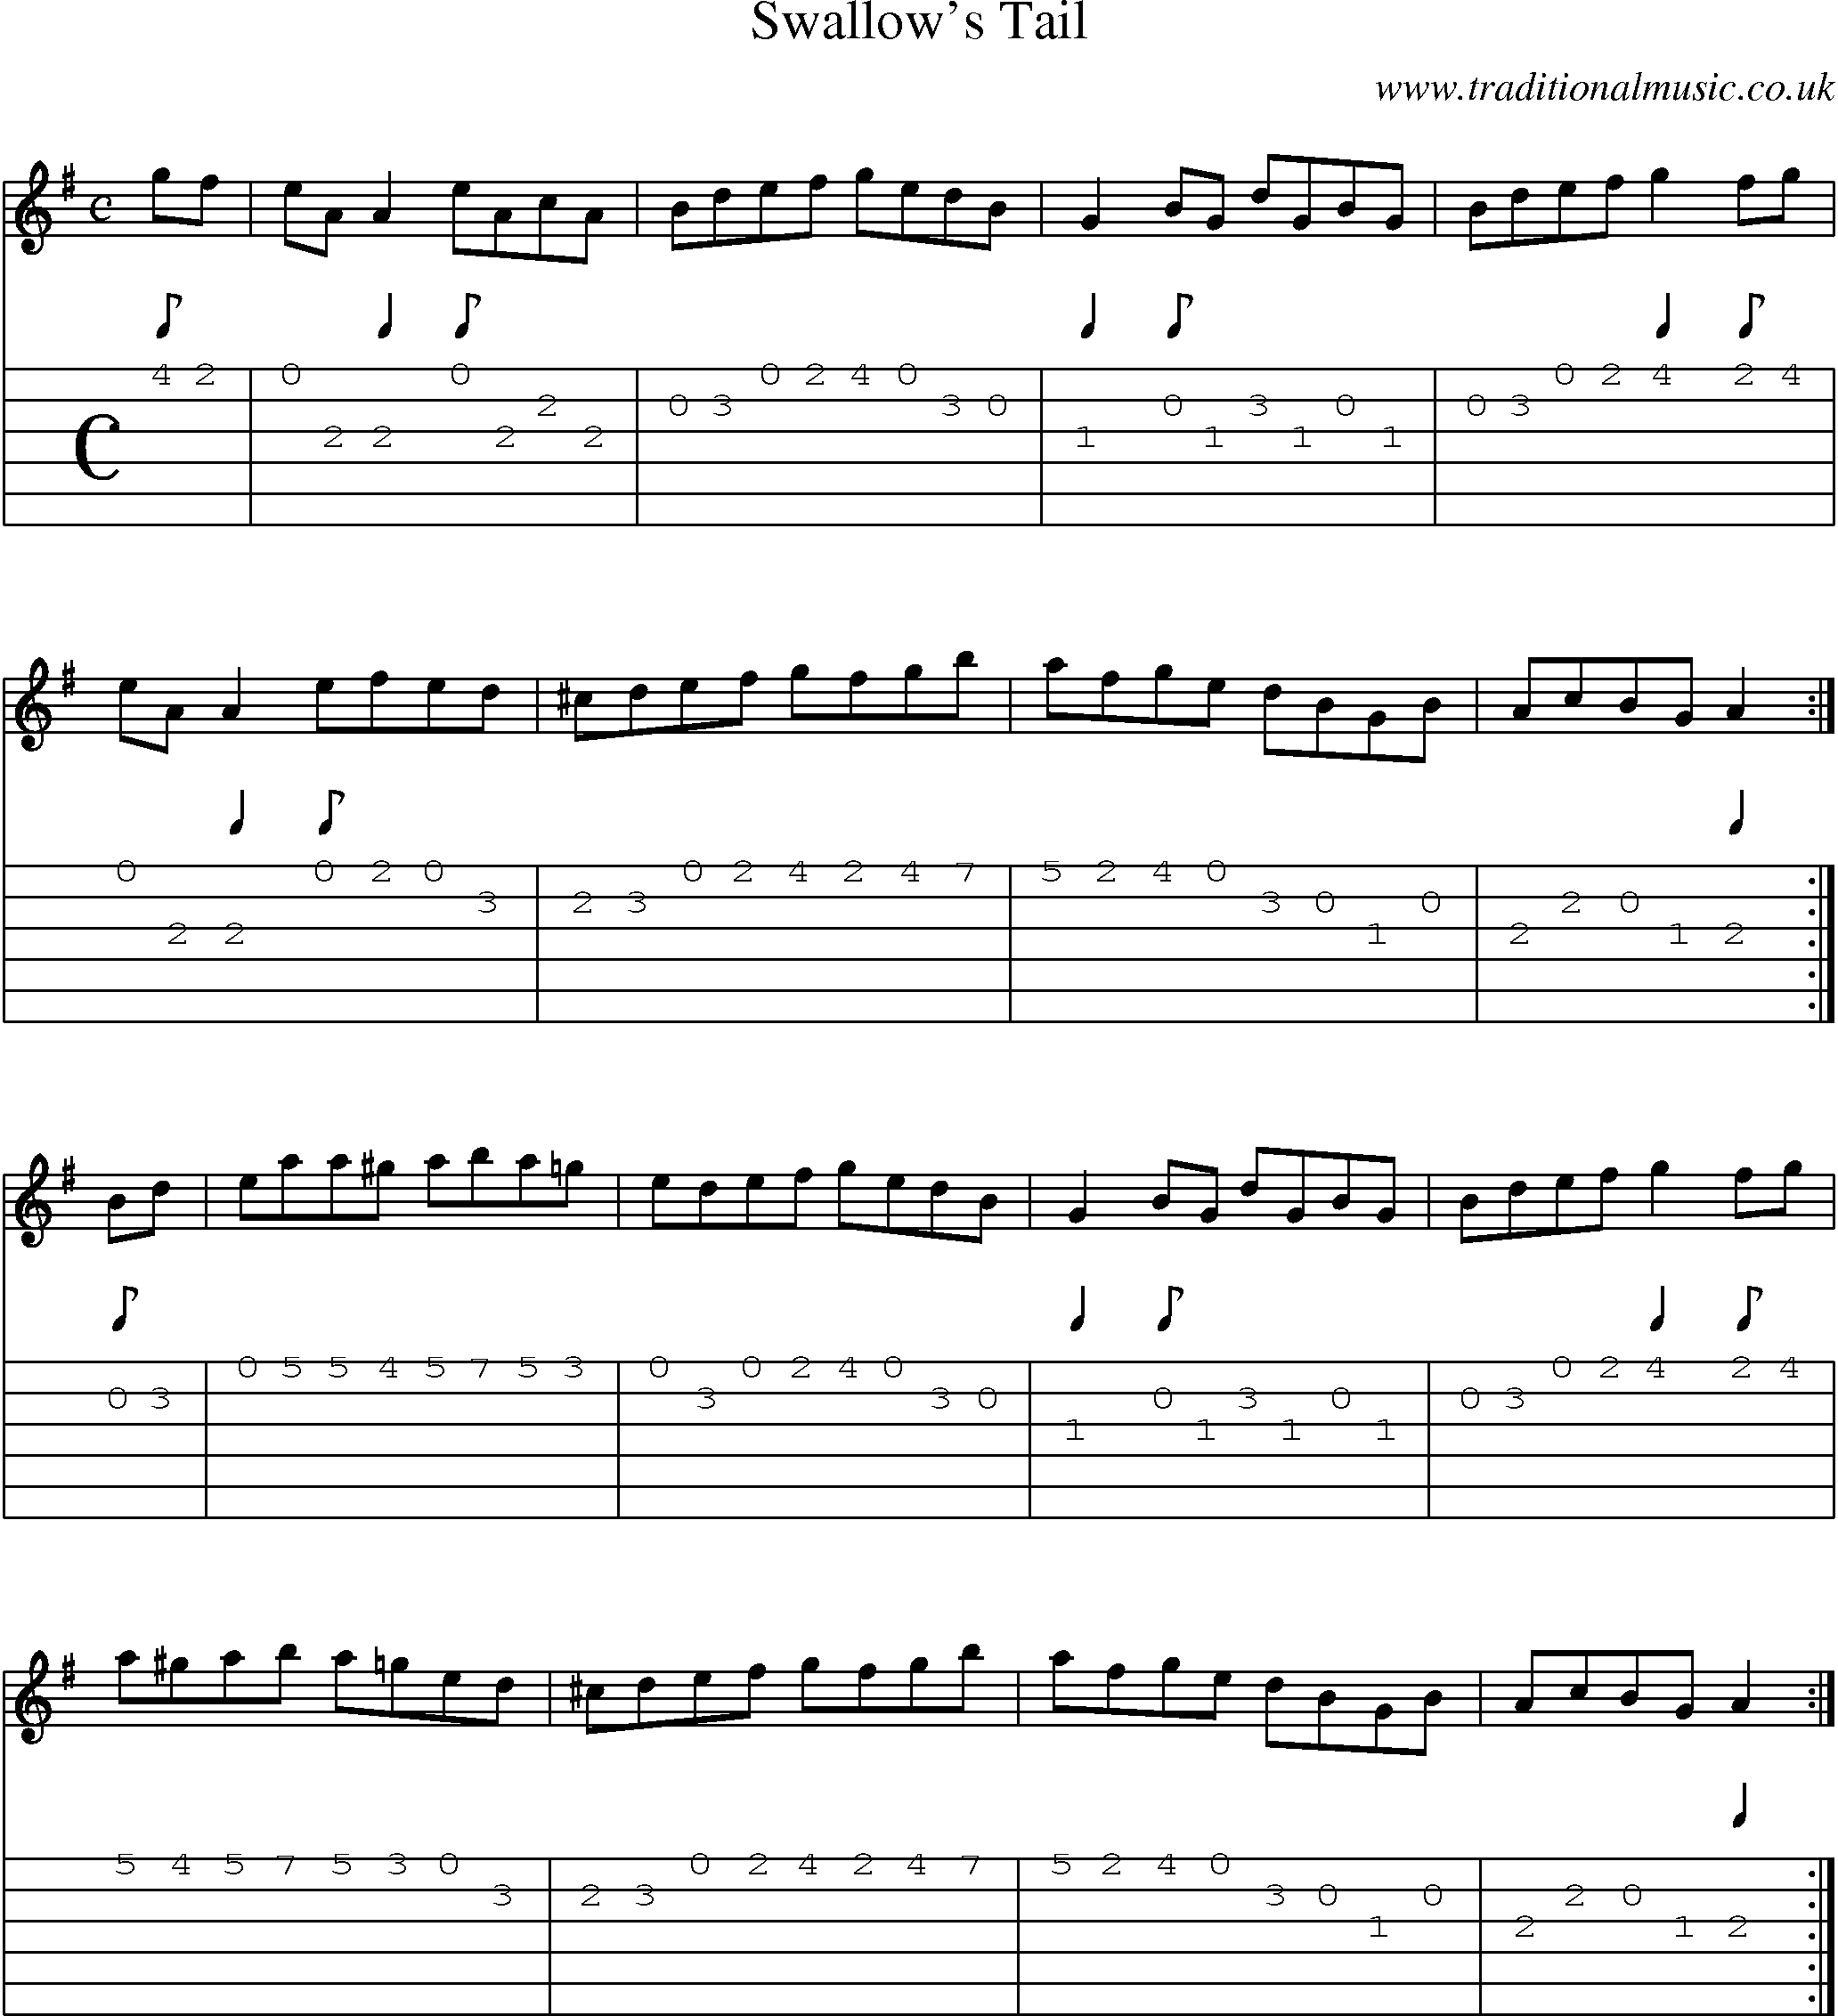 Music Score and Guitar Tabs for Swallows Tail